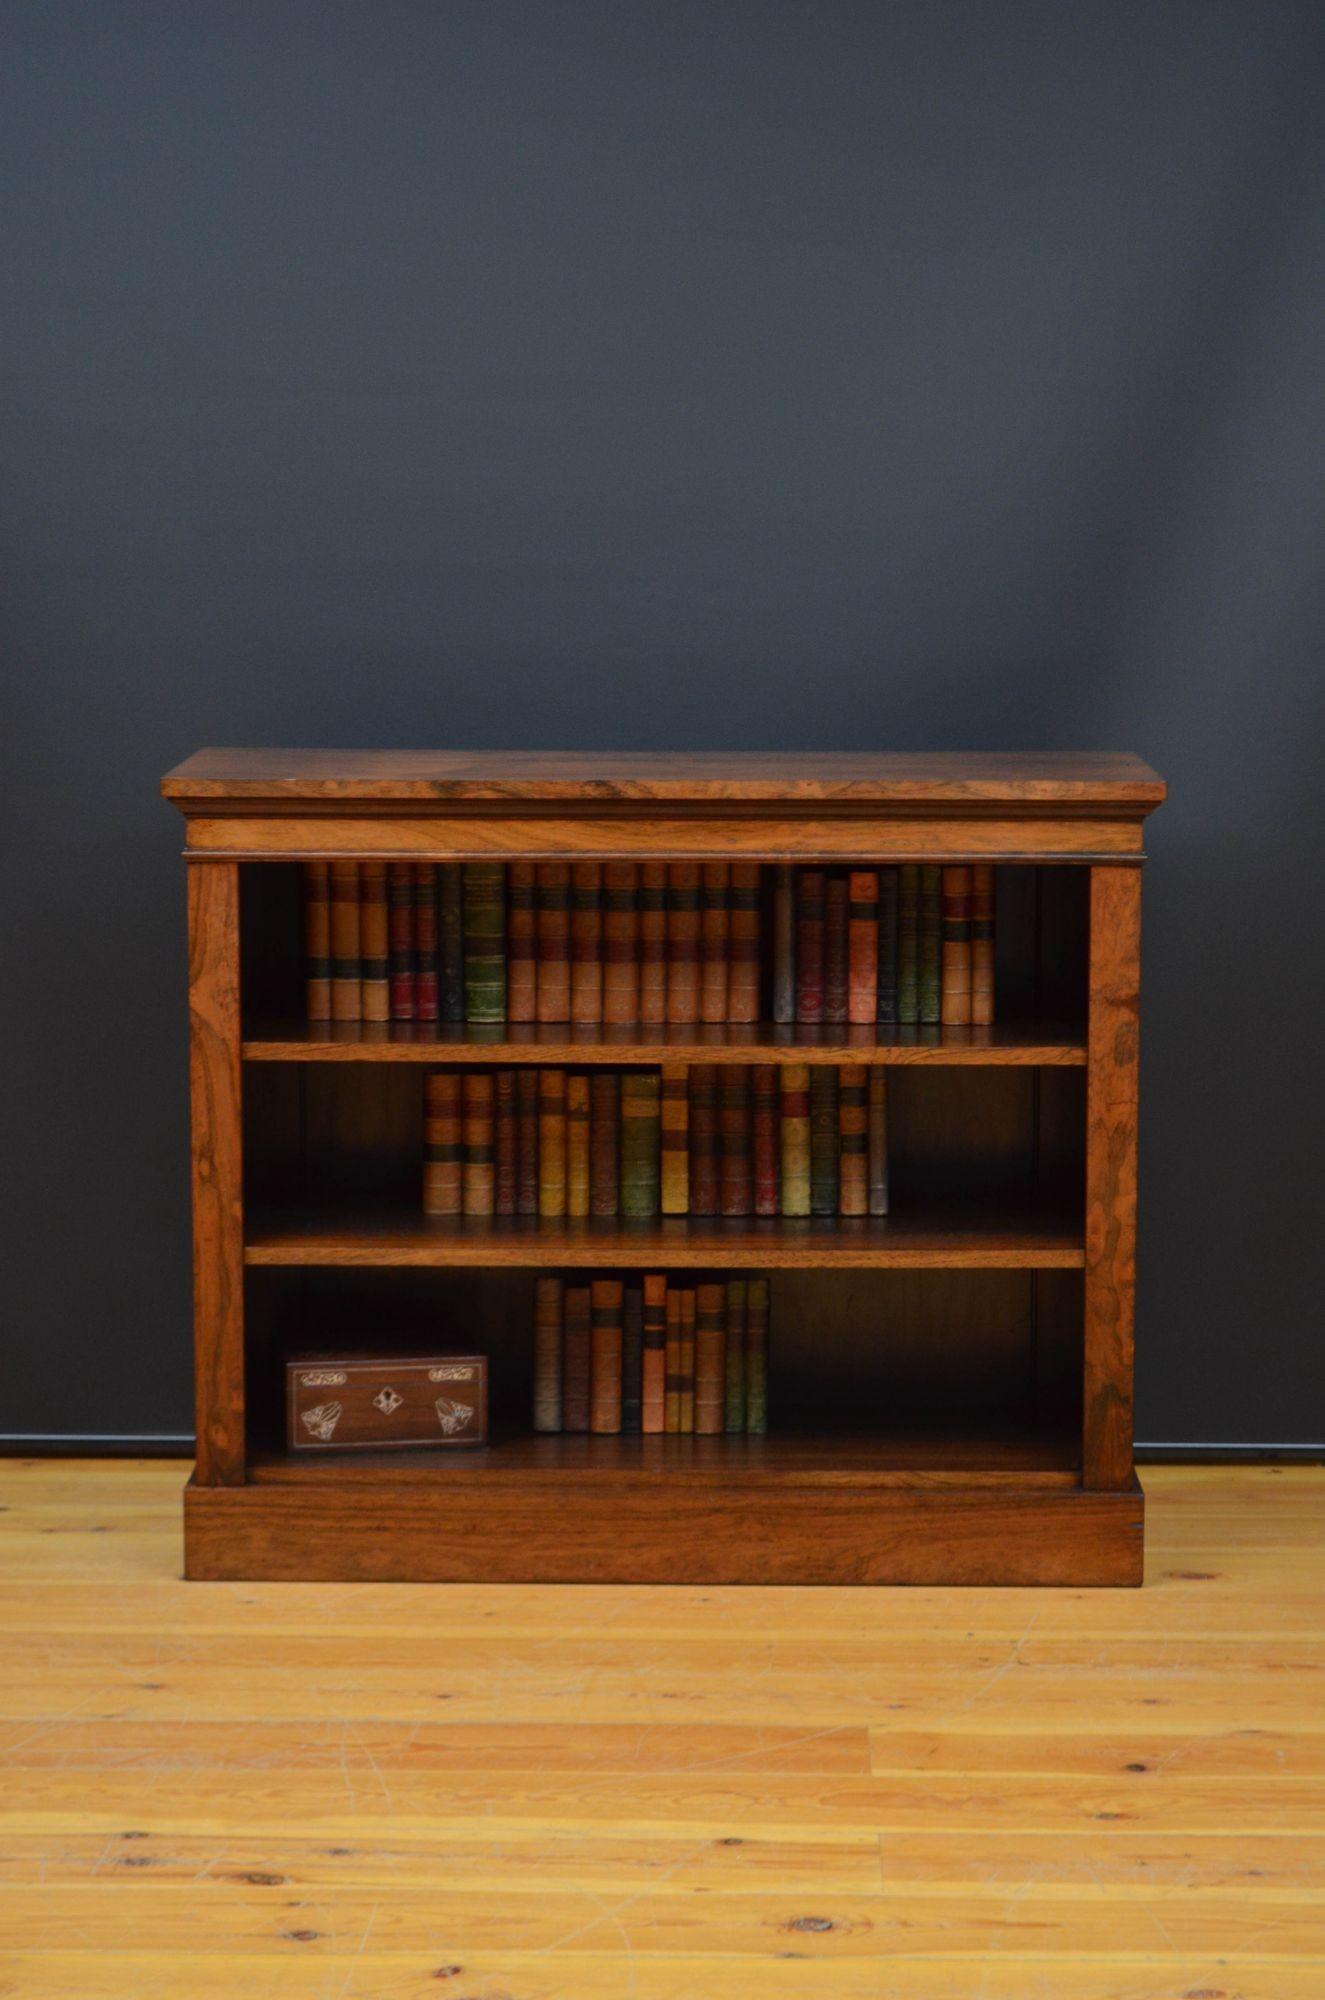 Sn5546 Fine quality William IV rosewood open bookcase of simple and elegant design, having oversailing top with very attractive grain above two height adjustable shelves, all standing on plinth base. This antique bookcase retains its original finish